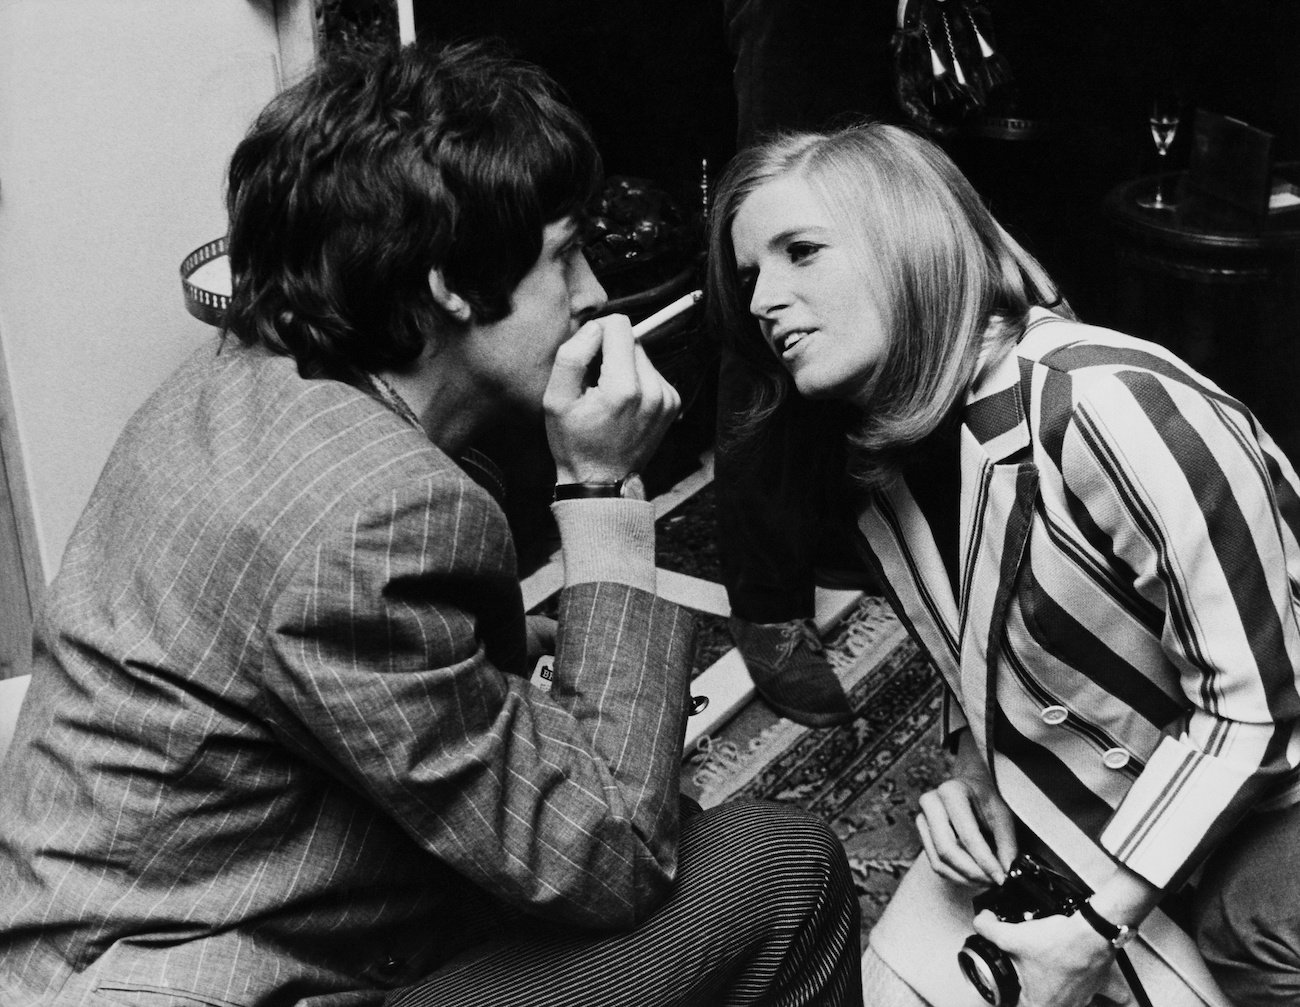 Paul McCartney in a suit and Linda Eastman in a dress in London, 1967.